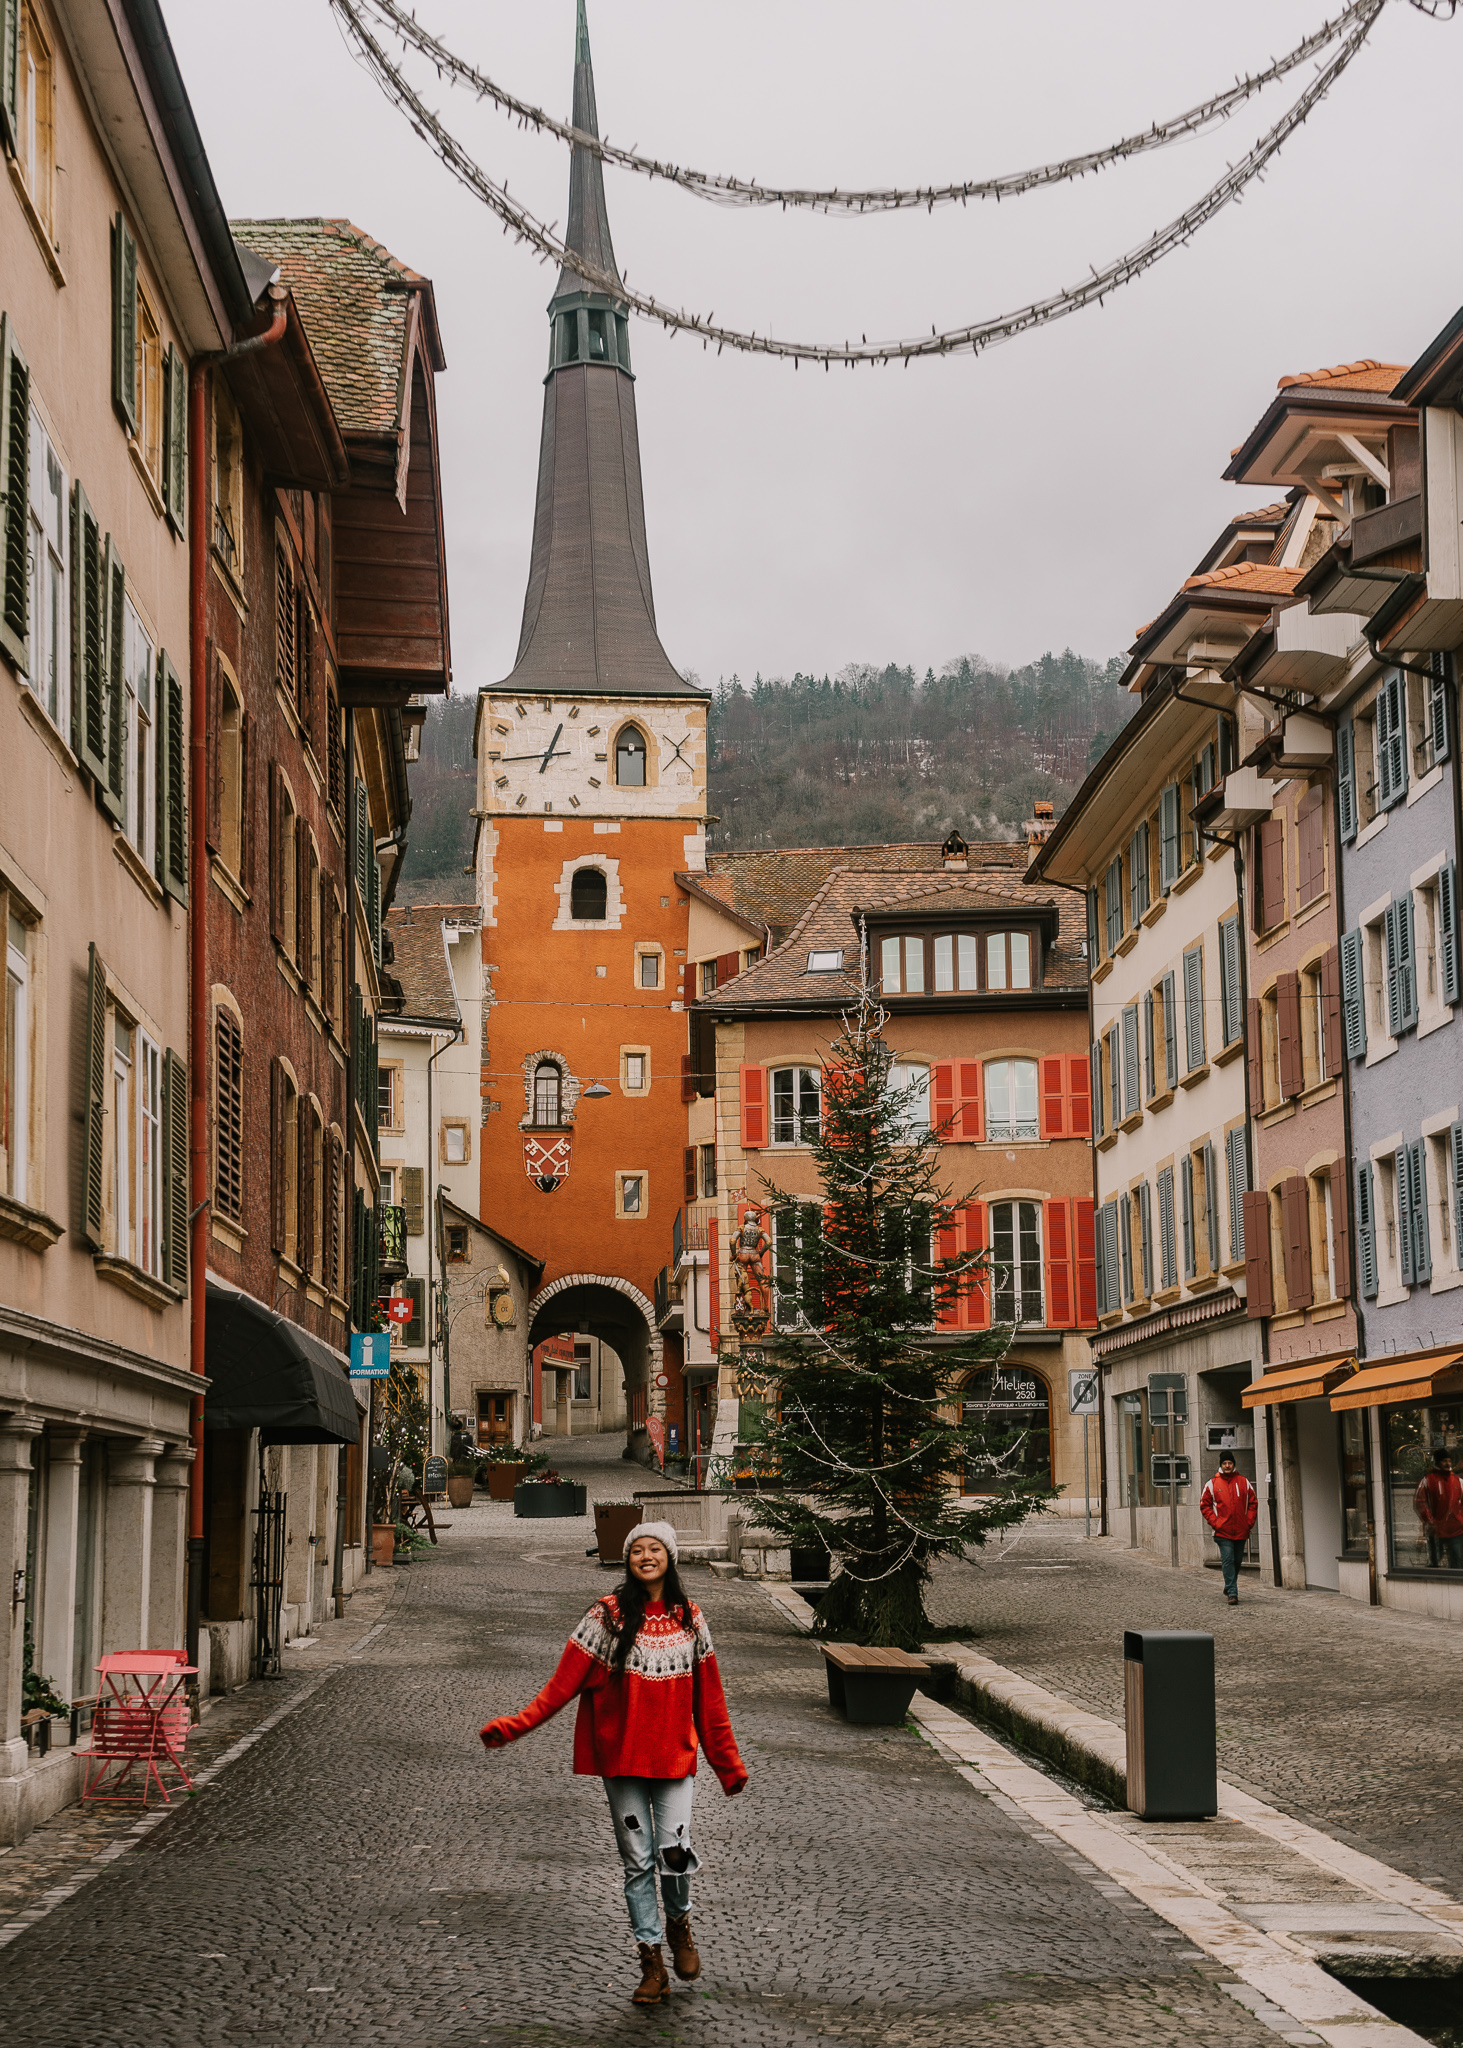 La Nueveville village from the main street with a large orange clock tower, one of the most beautiful villages in Switzerland in winter